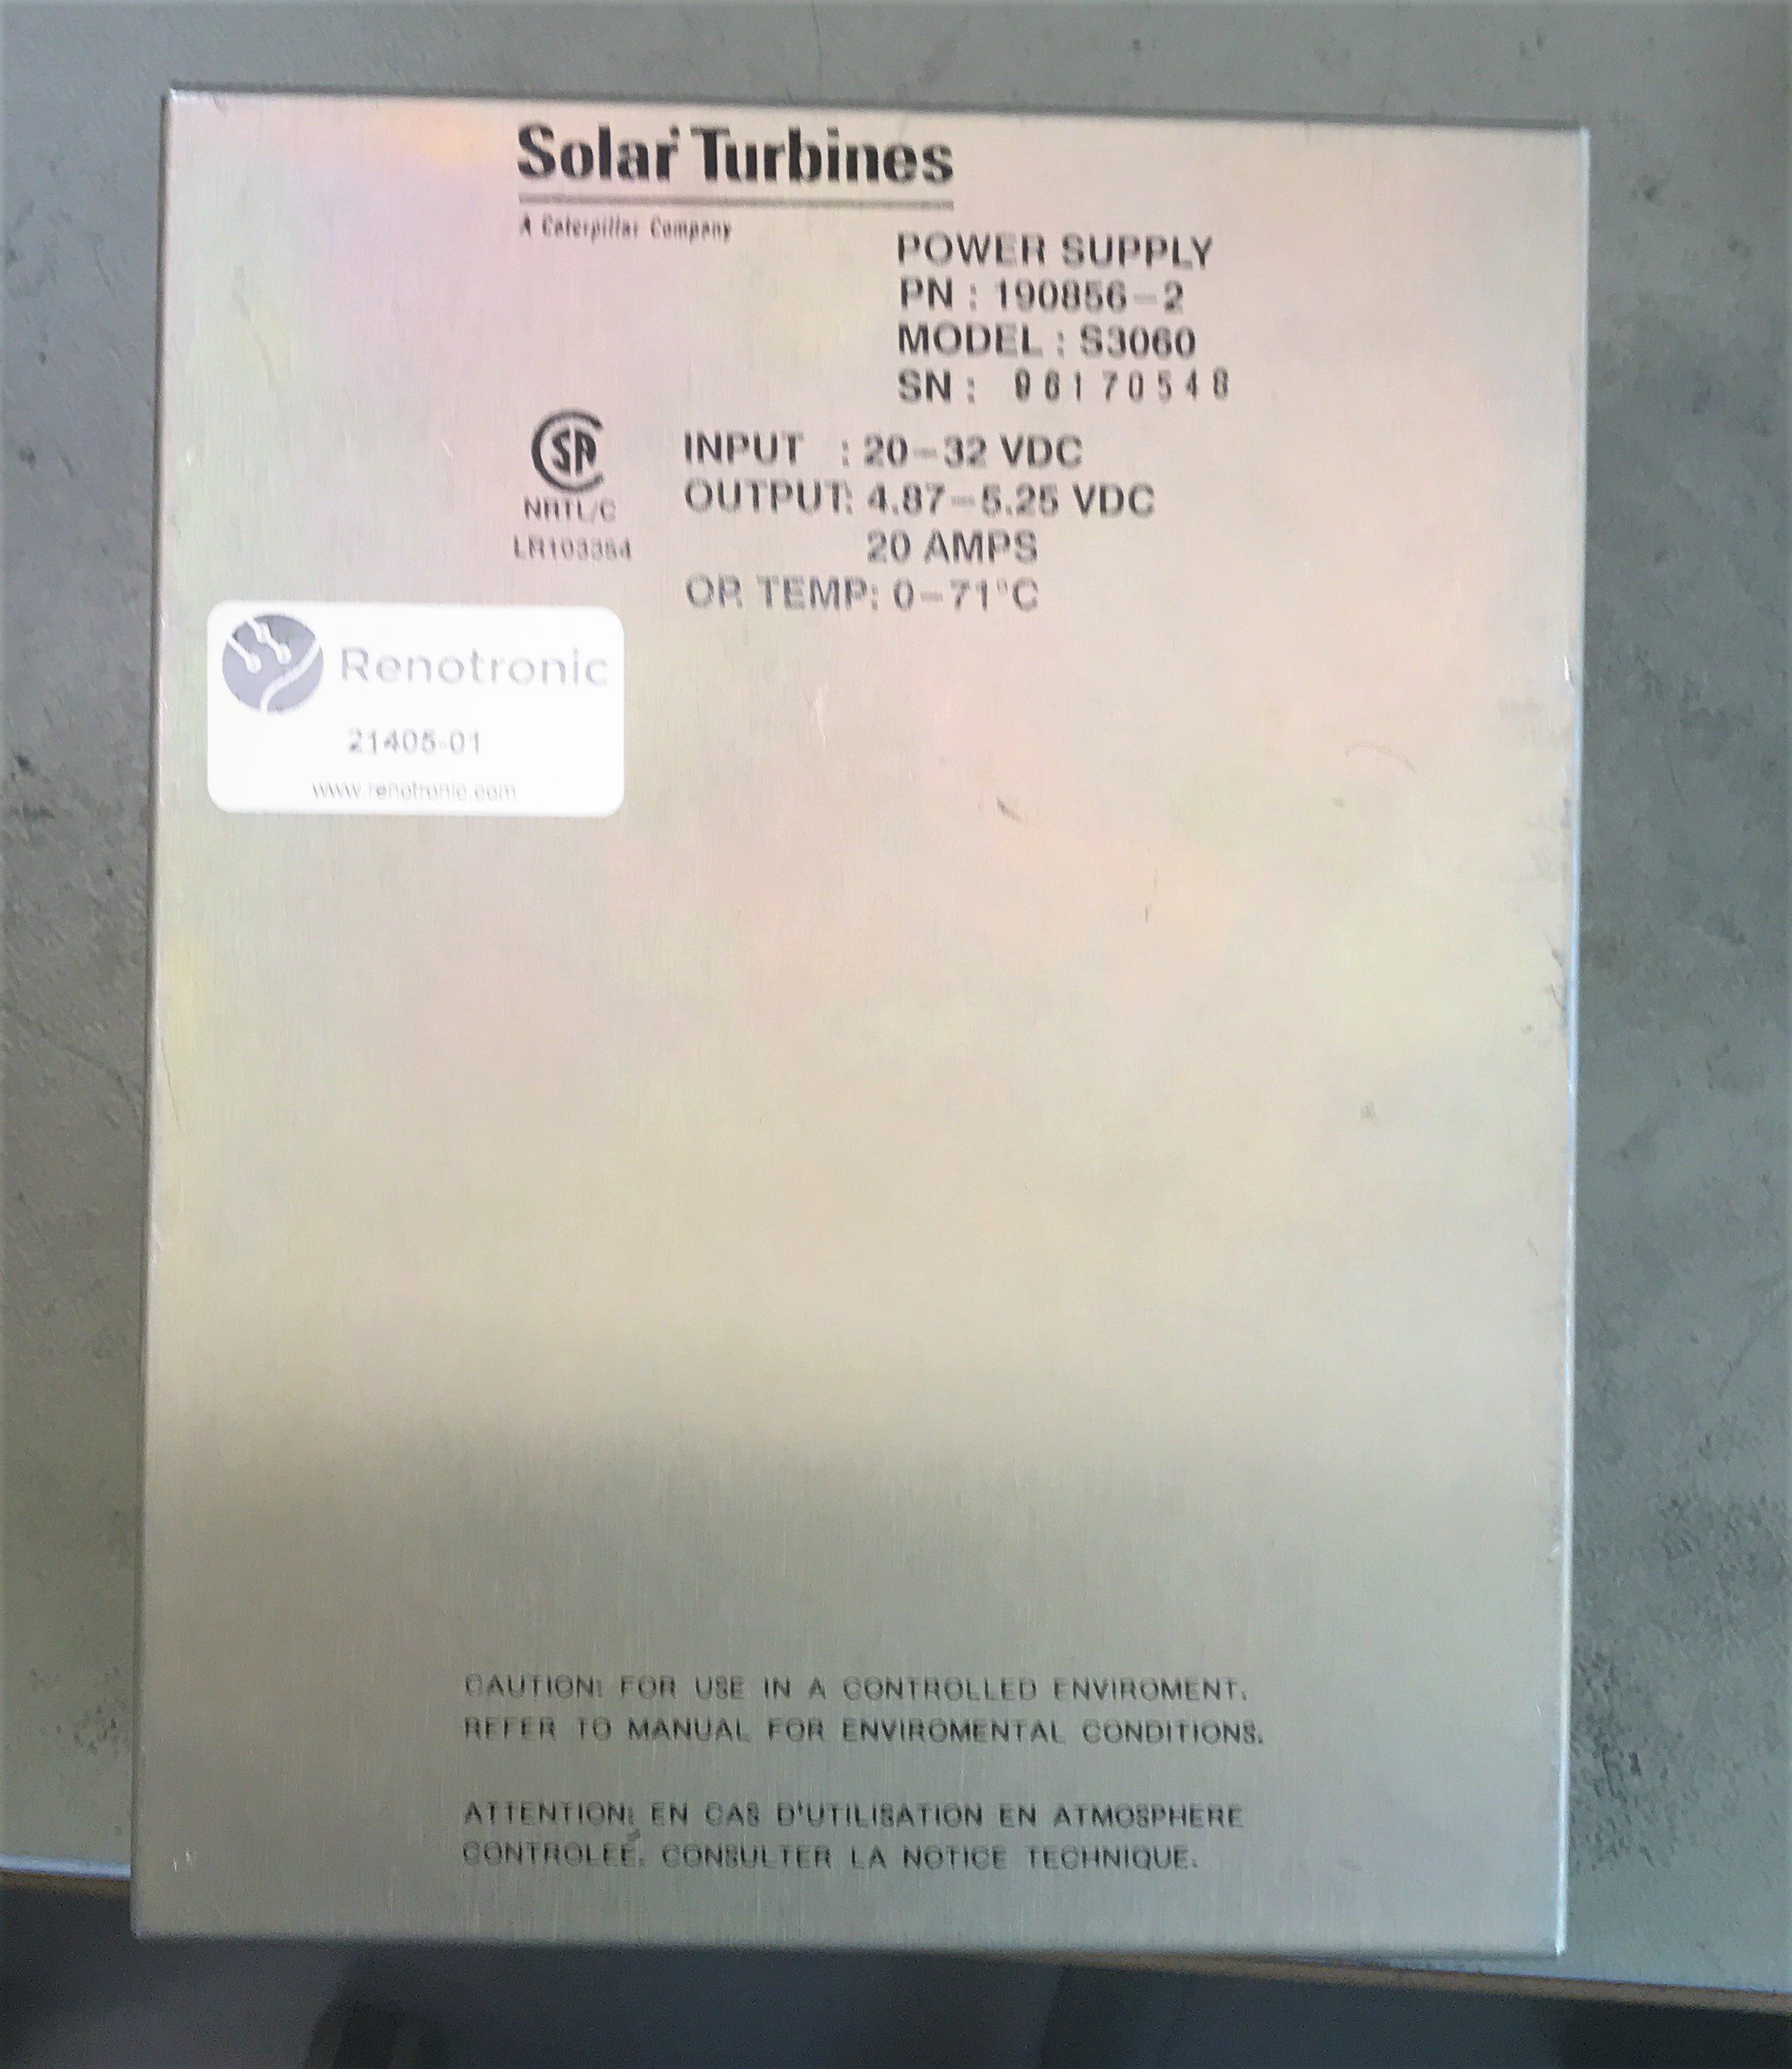 You are currently viewing Solar Turbines S3060 Power supply